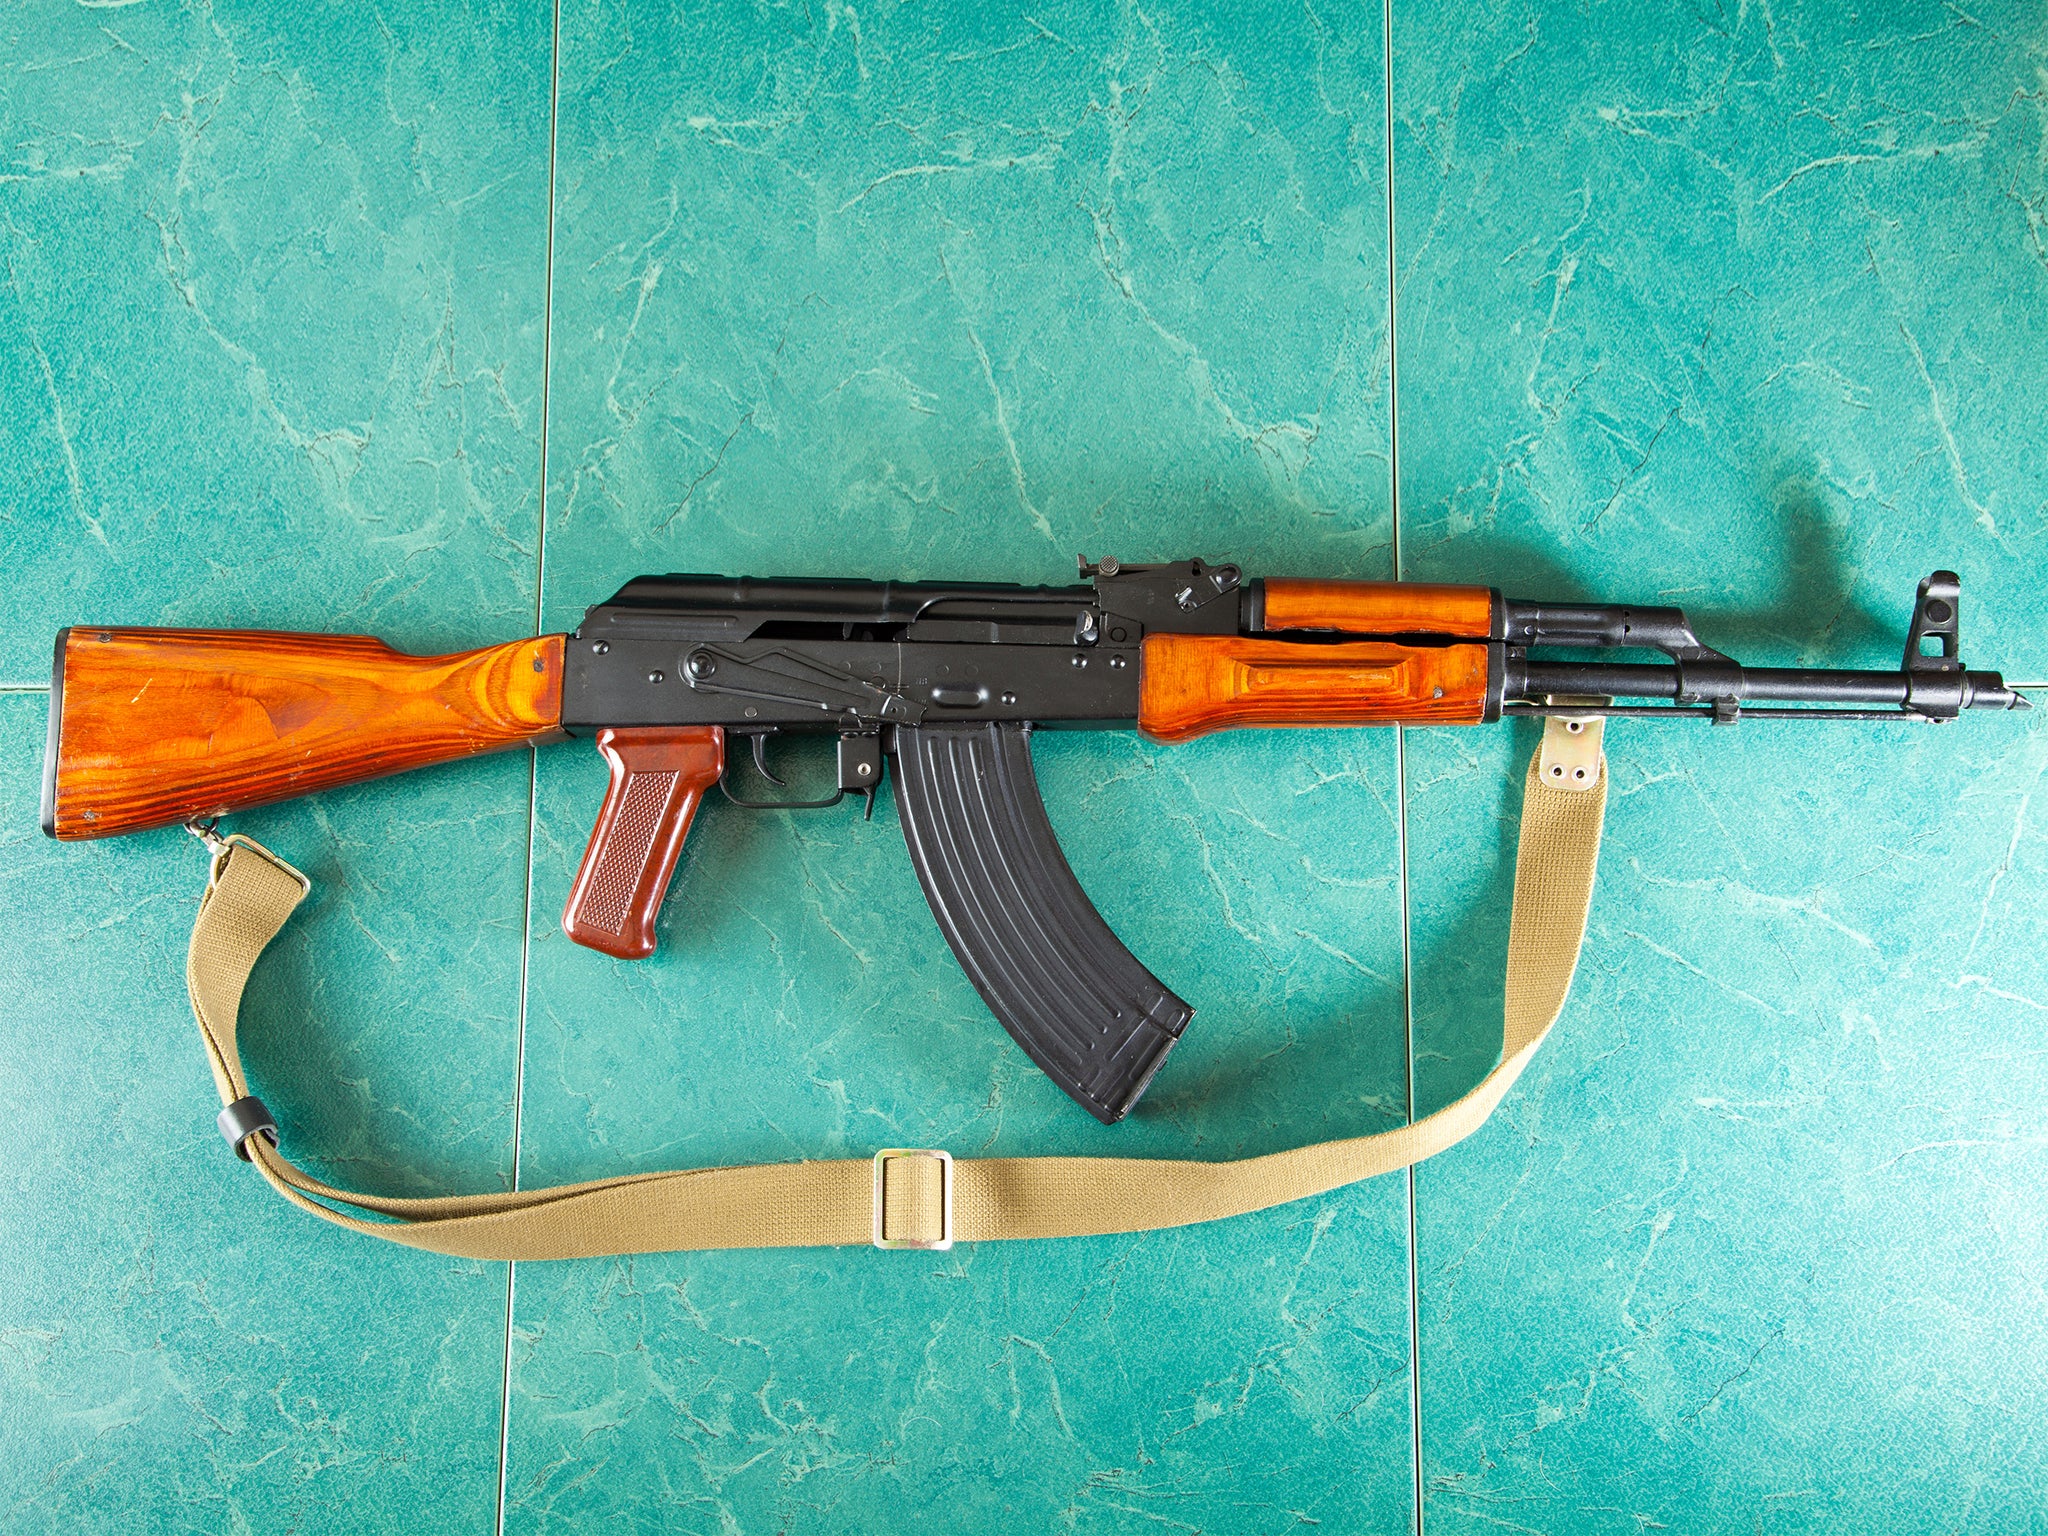 The AK-47 is surely the most recognisable rifle in the world